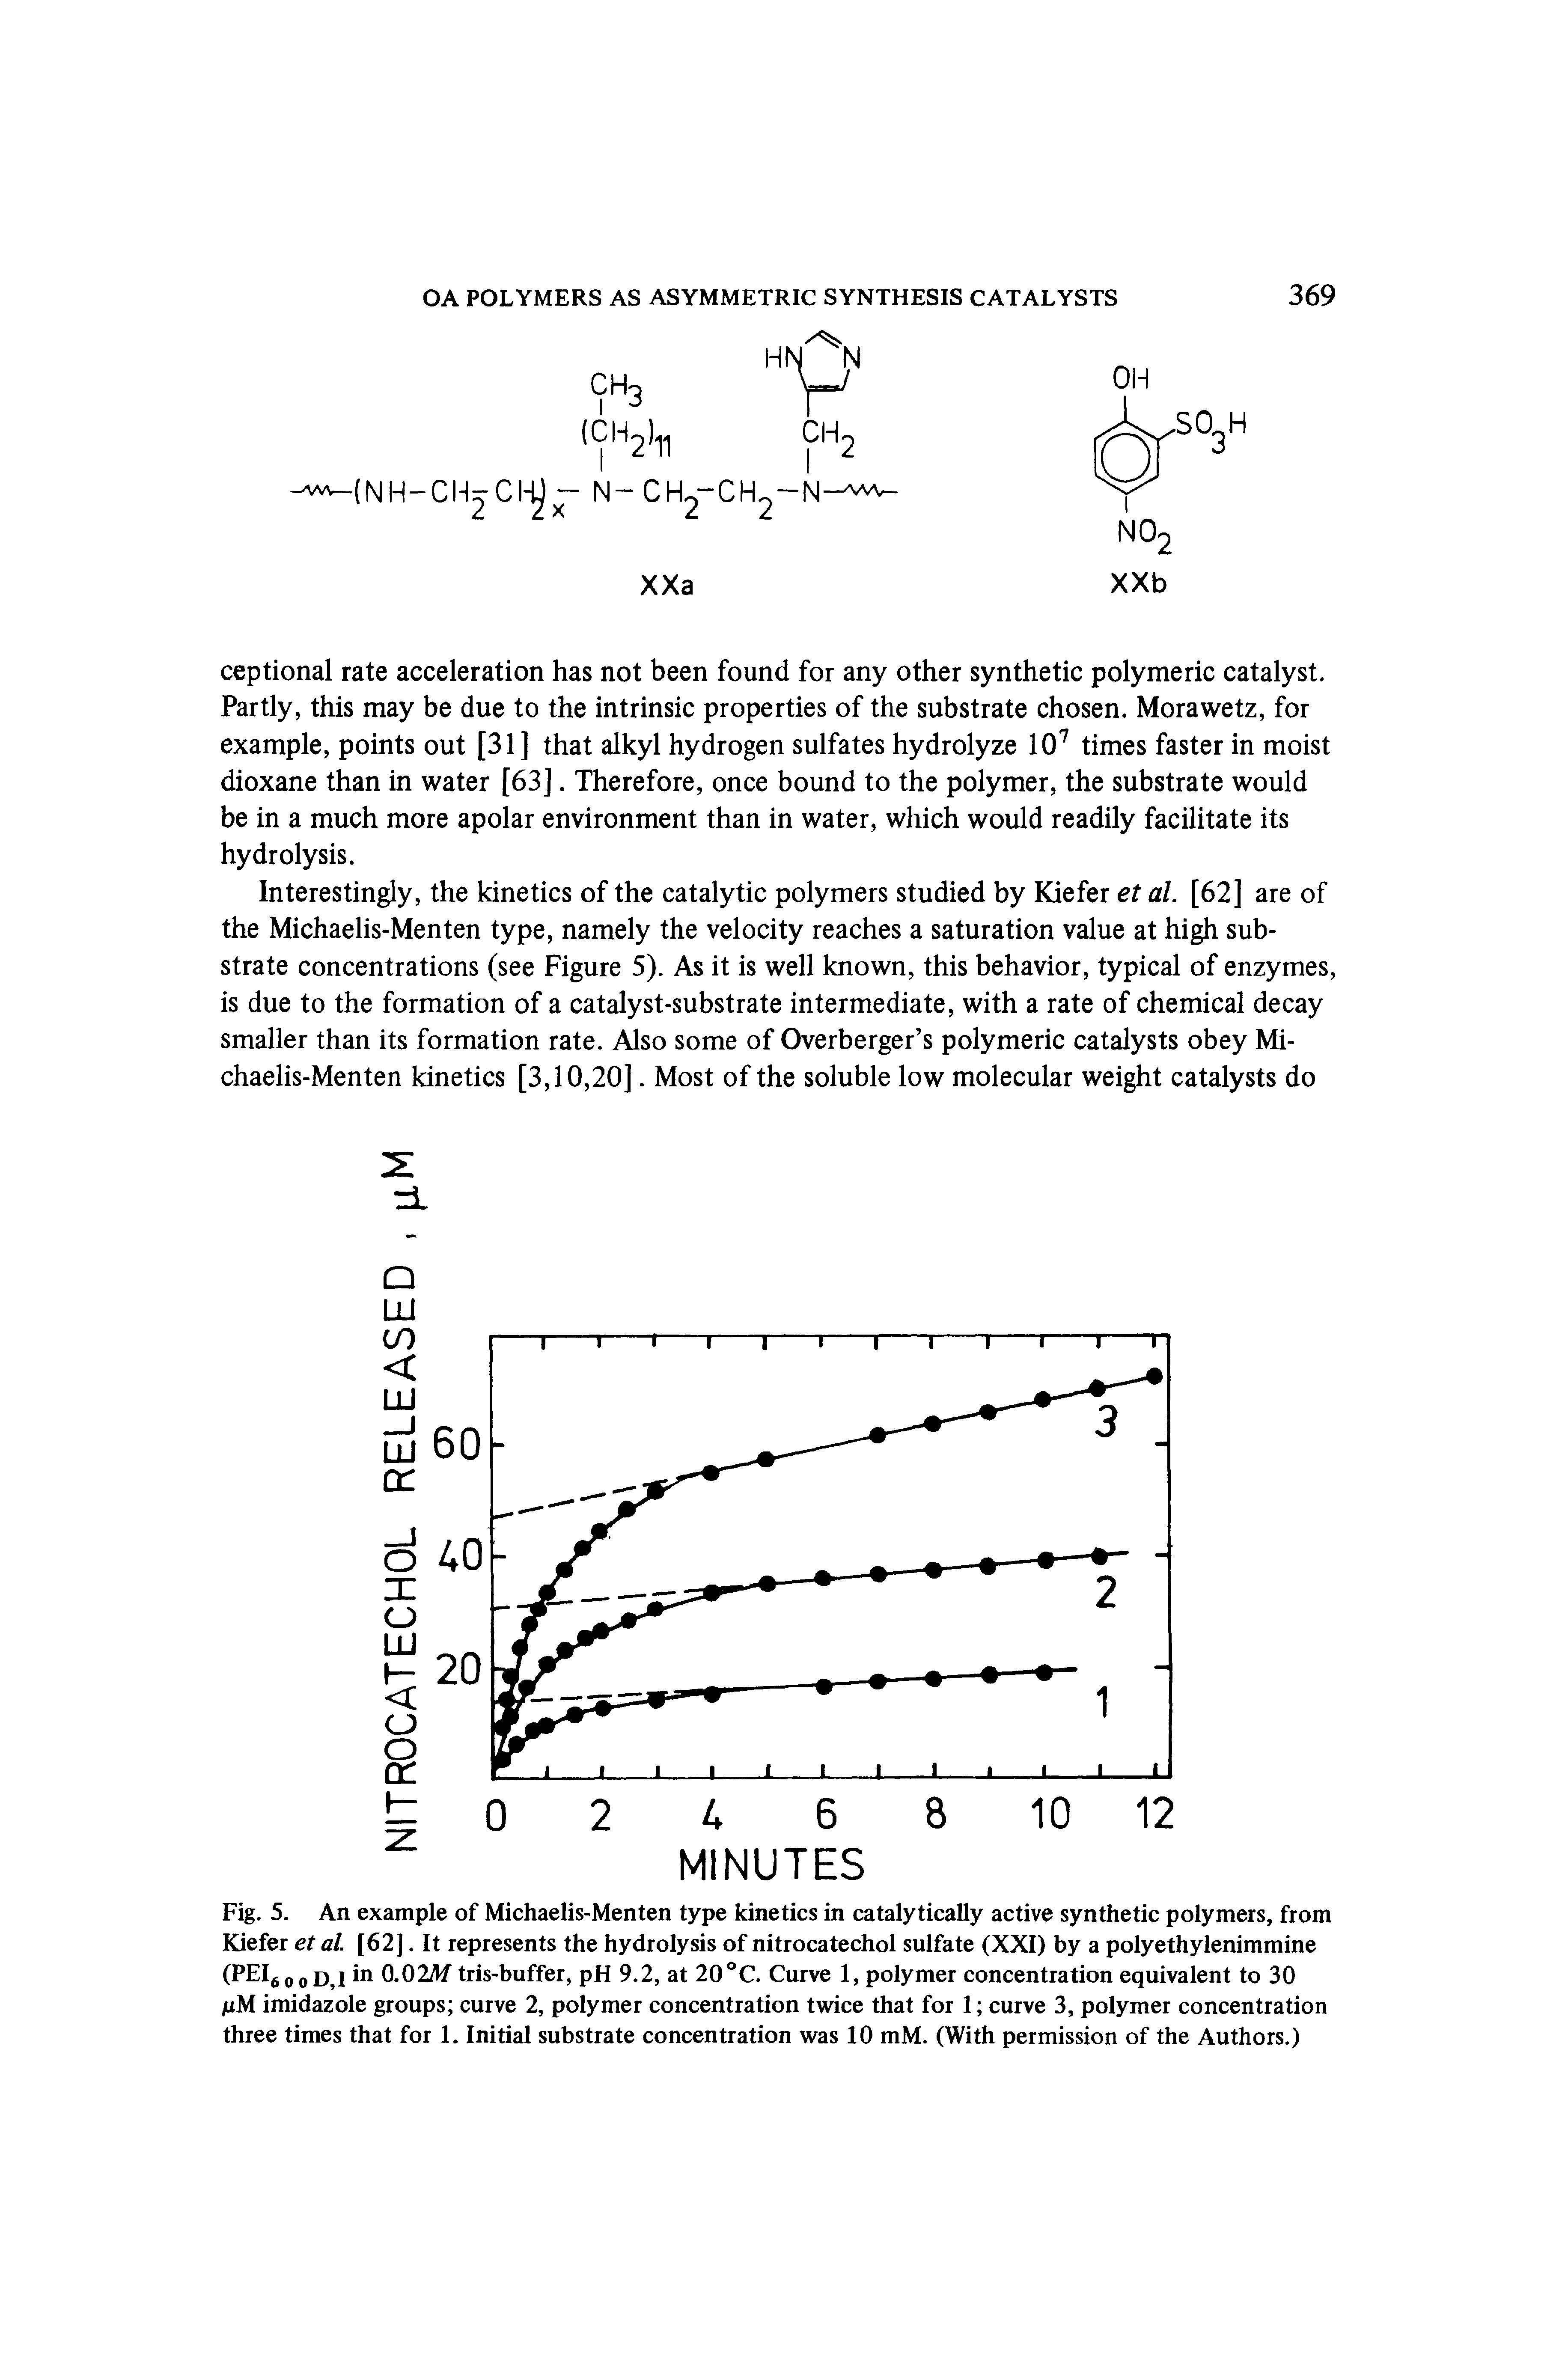 Fig. 5. An example of Michaelis-Menten type kinetics in catalytically active synthetic polymers, from Kiefer etaL [62]. It represents the hydrolysis of nitrocatechol sulfate (XXI) by a polyethylenimmine (PEIg ),I in 0.02Af tris-buffer, pH 9.2, at 20 C. Curve 1, polymer concentration equivalent to 30 /uM imidazole groups curve 2, polymer concentration twice that for 1 curve 3, polymer concentration three times that for 1. Initial substrate concentration was 10 mM. (With permission of the Authors.)...